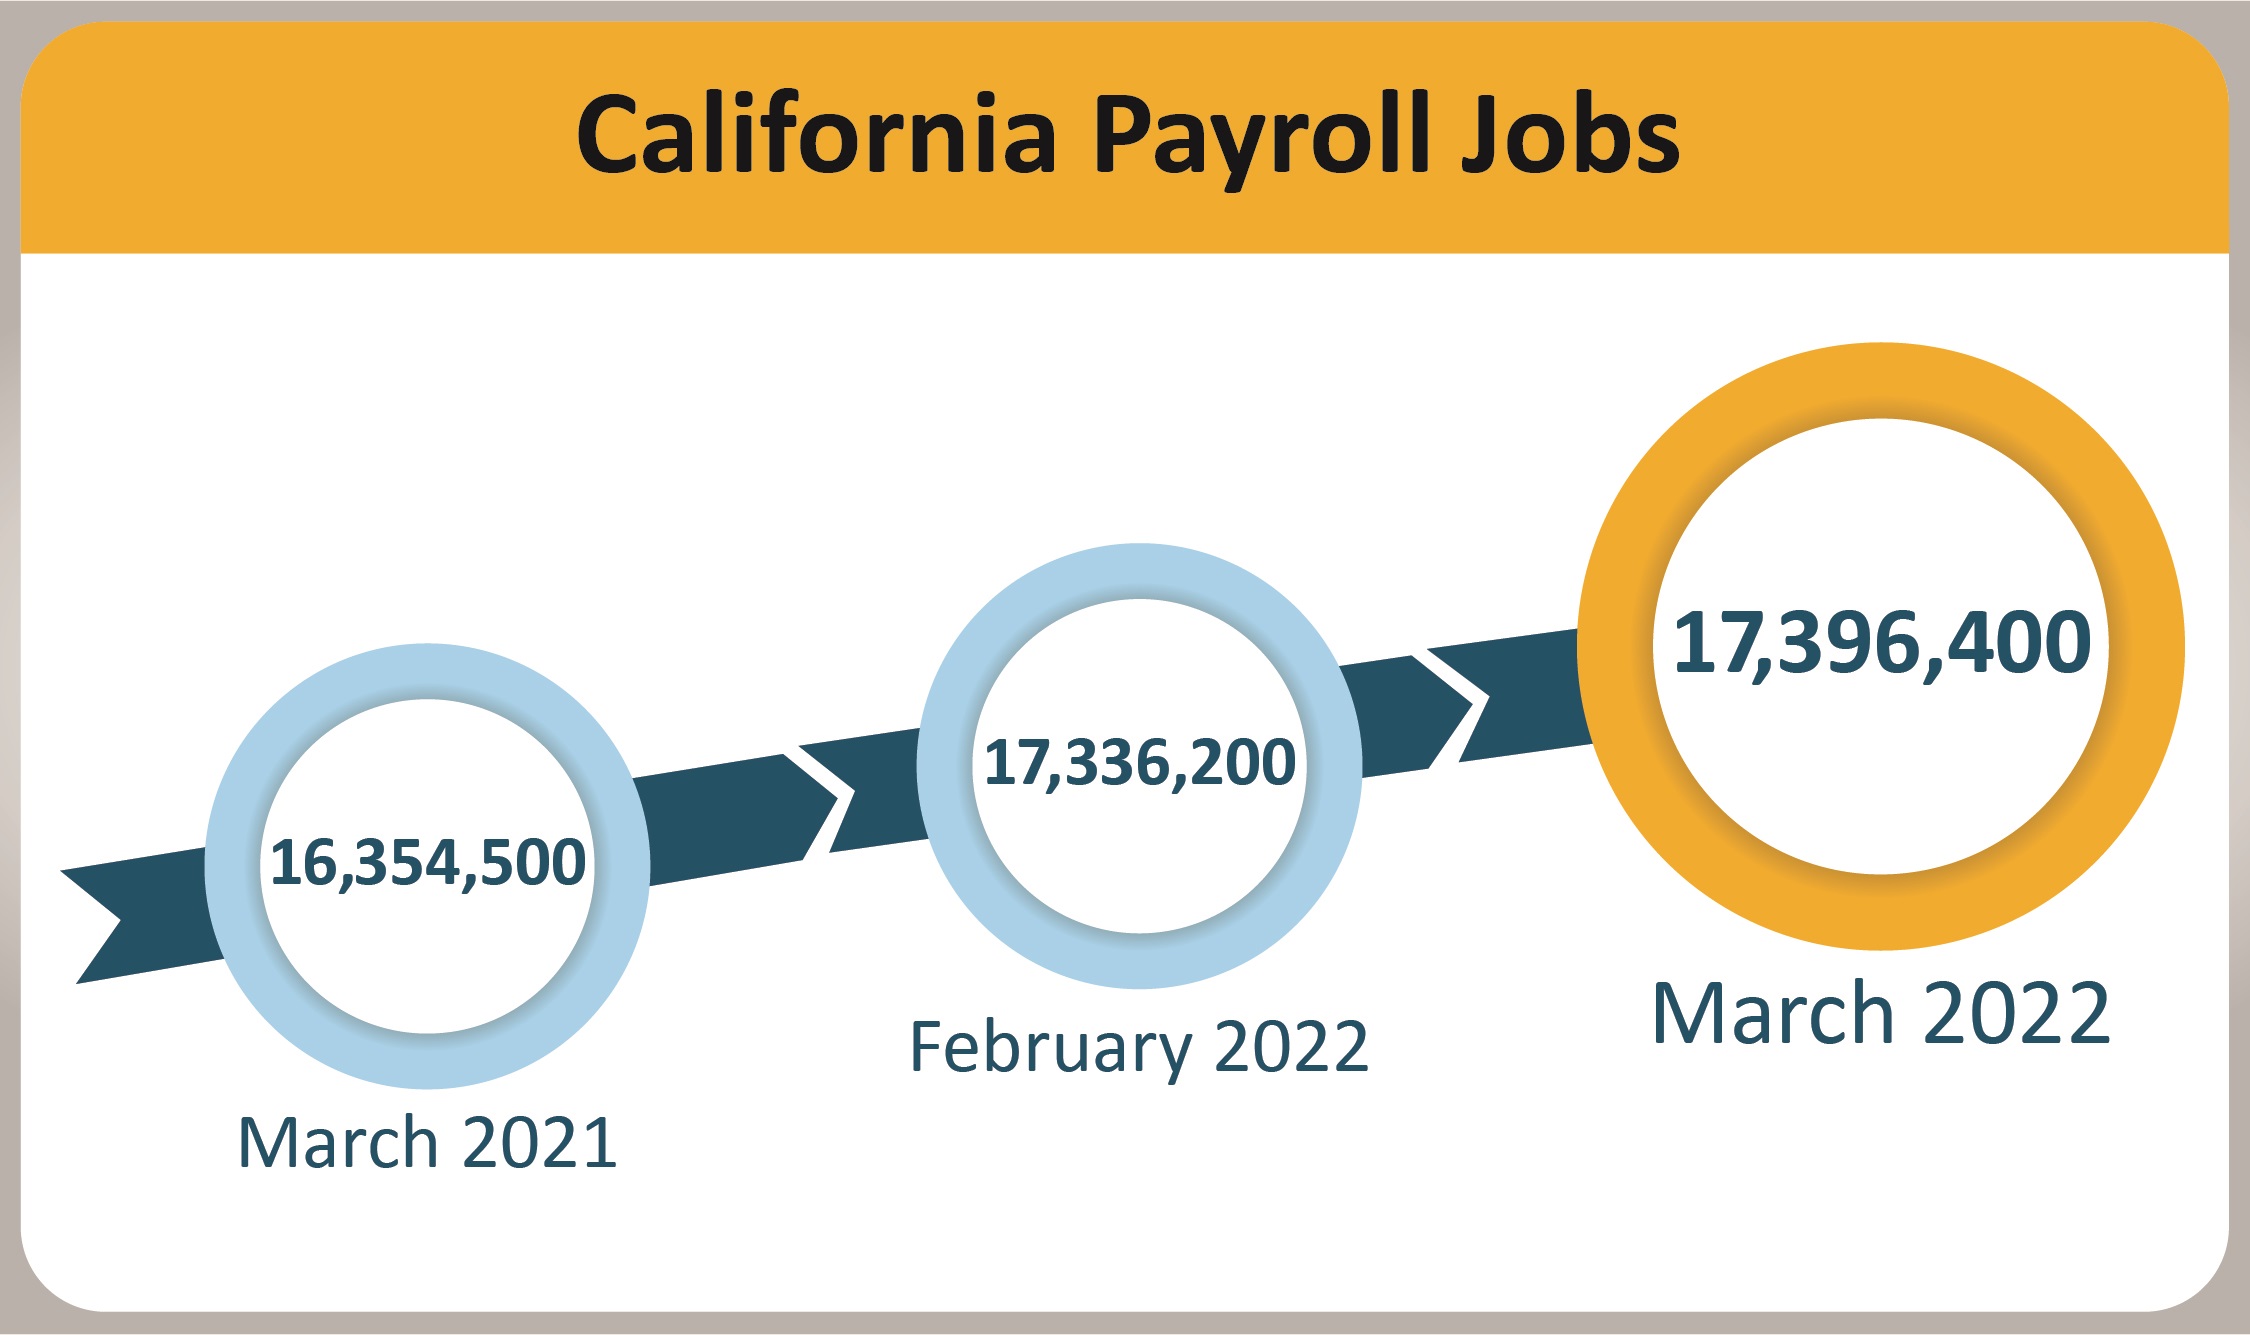 California payroll jobs totaled 17,338,900 as of February 2022.